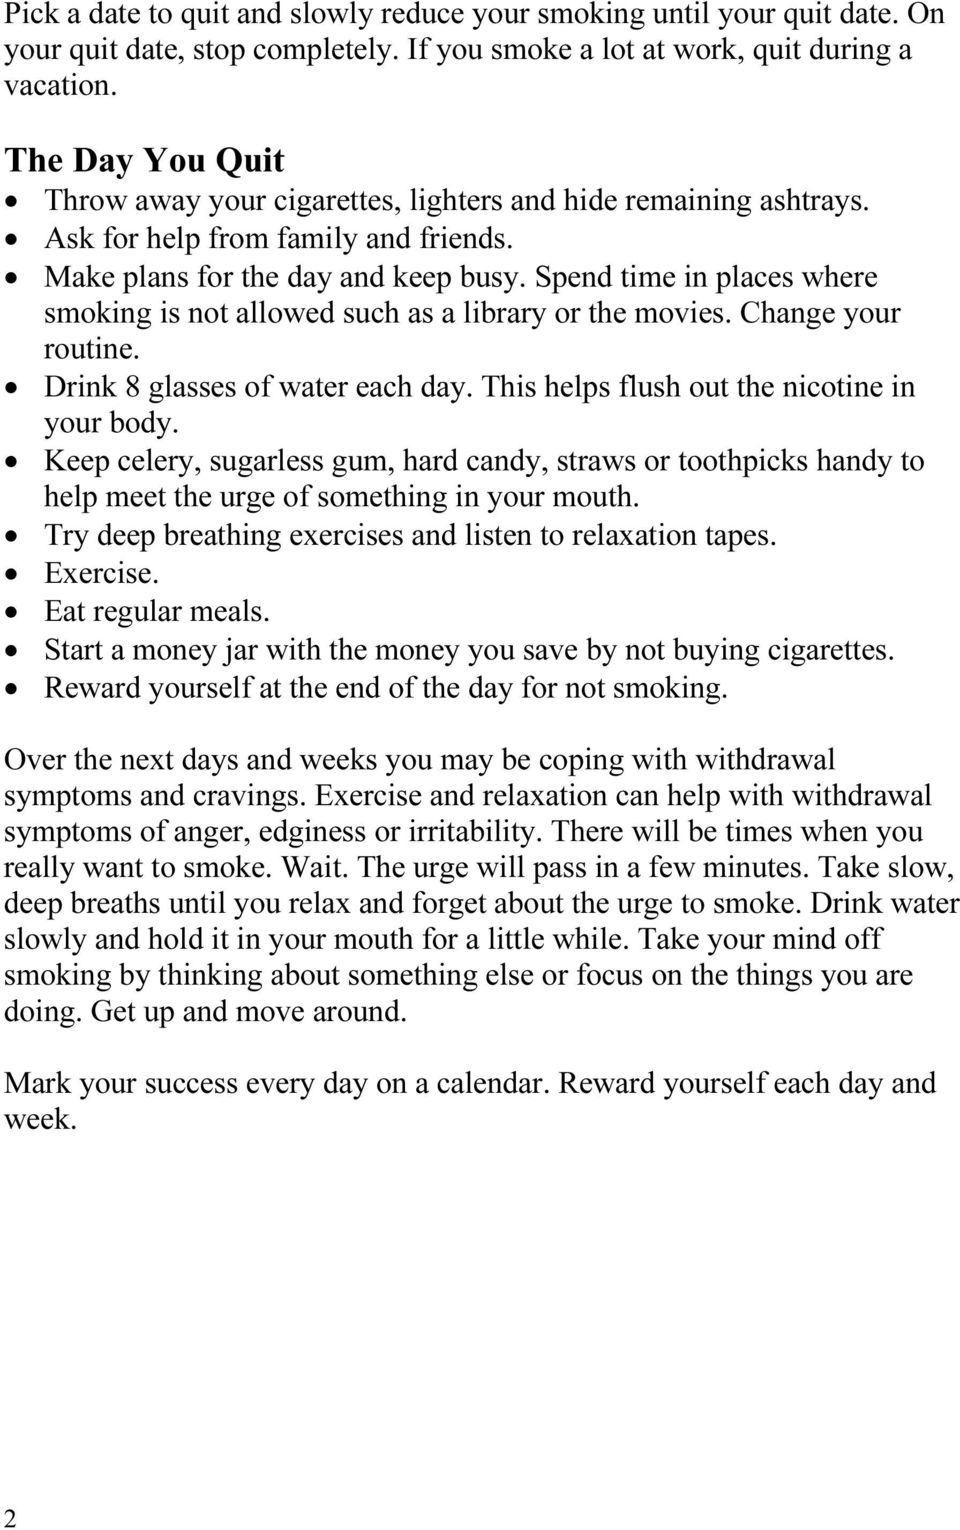 Spend time in places where smoking is not allowed such as a library or the movies. Change your routine. Drink 8 glasses of water each day. This helps flush out the nicotine in your body.